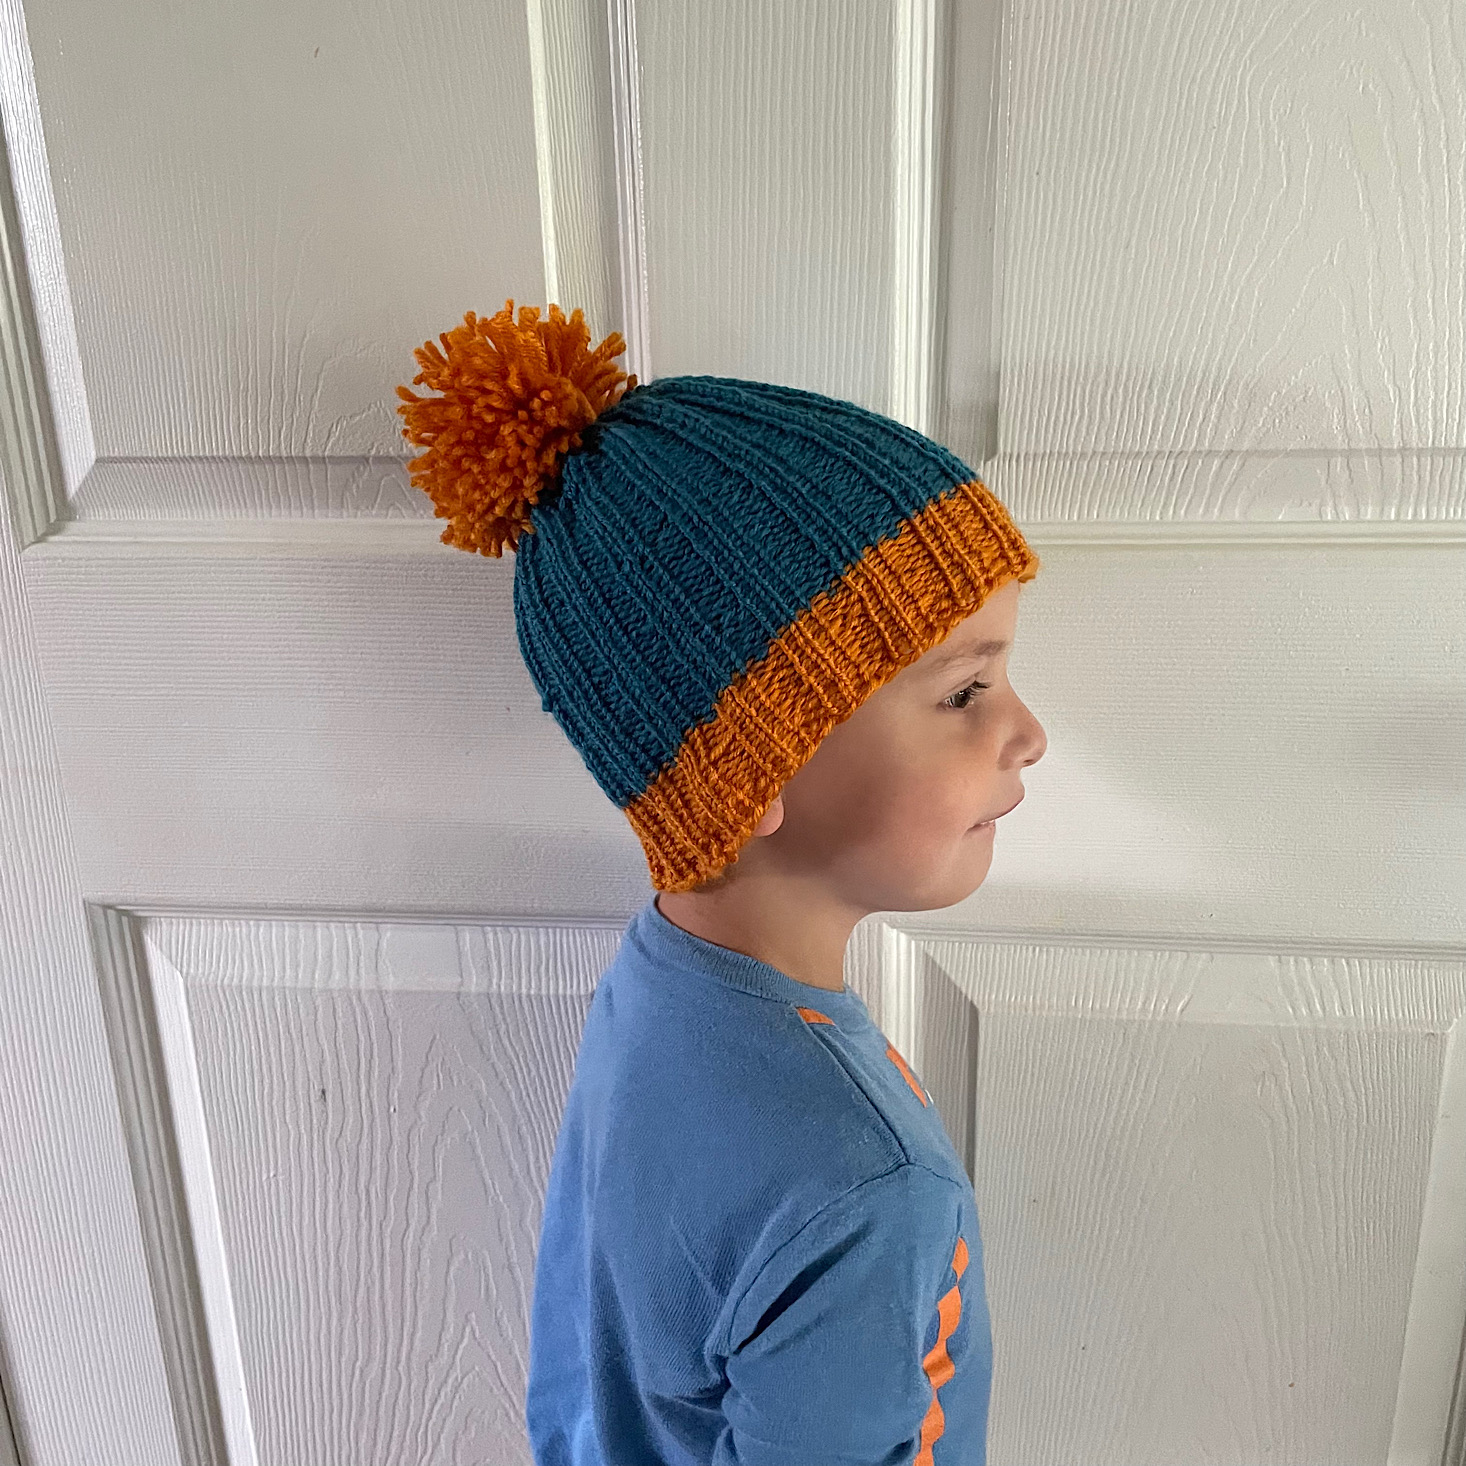 KiwiCo Maker Crate “Loom-Knitted Hats” Review